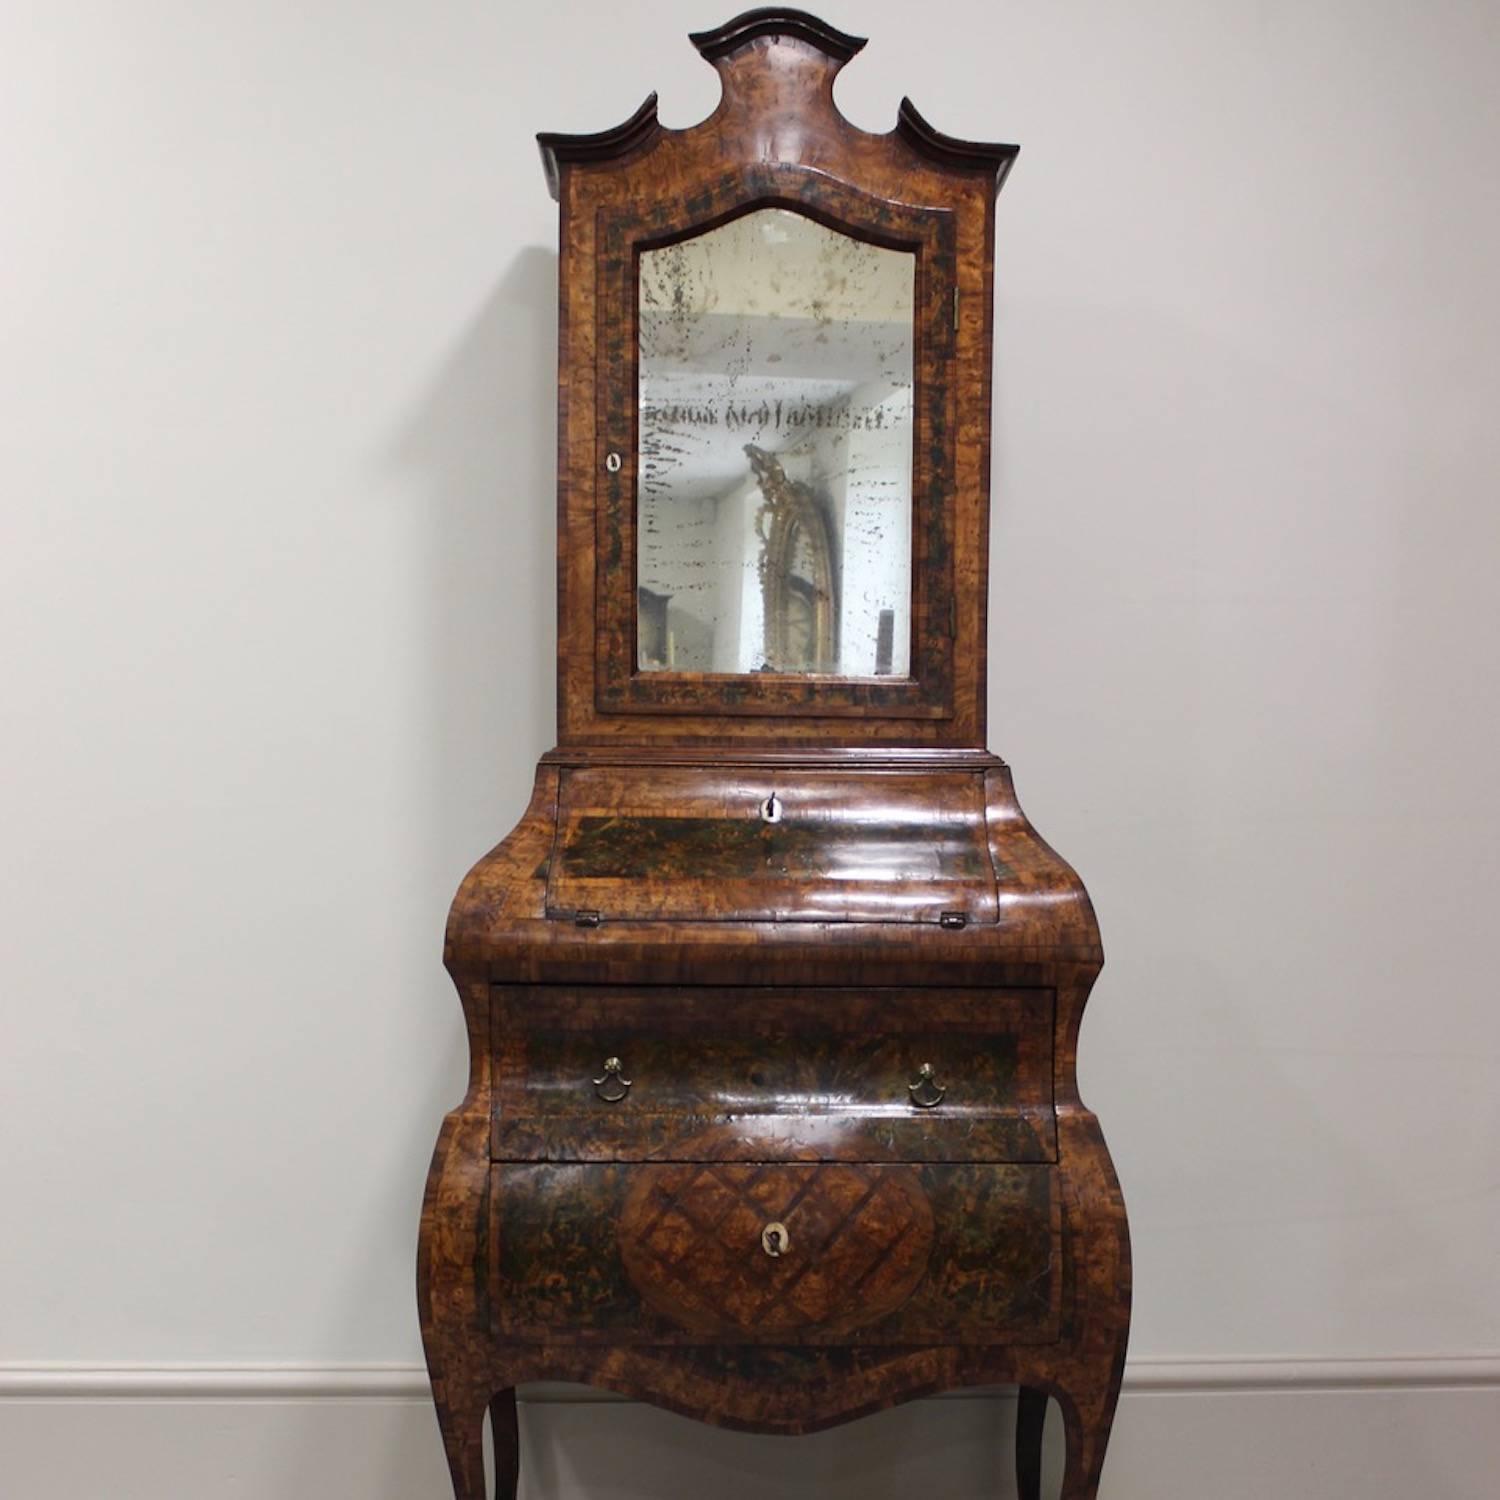 A charming and neatly-proportioned North European walnut and parquetry ladies bureau cabinet, the arched door of the upper section retaining its original glass plate, probably German or Italian, mid-18th century.